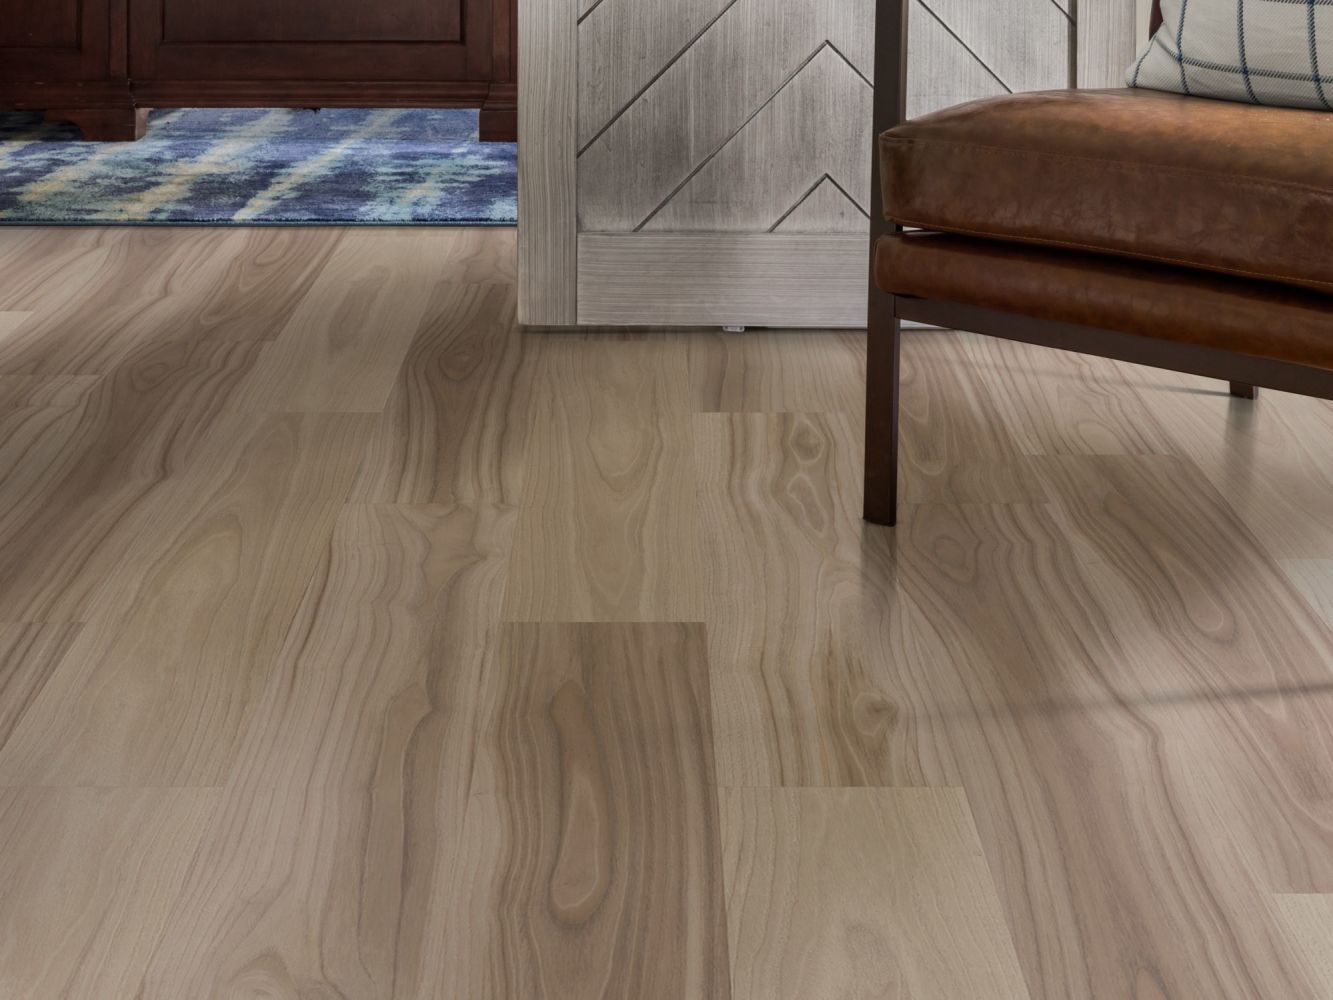 Shaw Floors Resilient Property Solutions Supino Hd+natural Bevel Bluff 01099_VE441